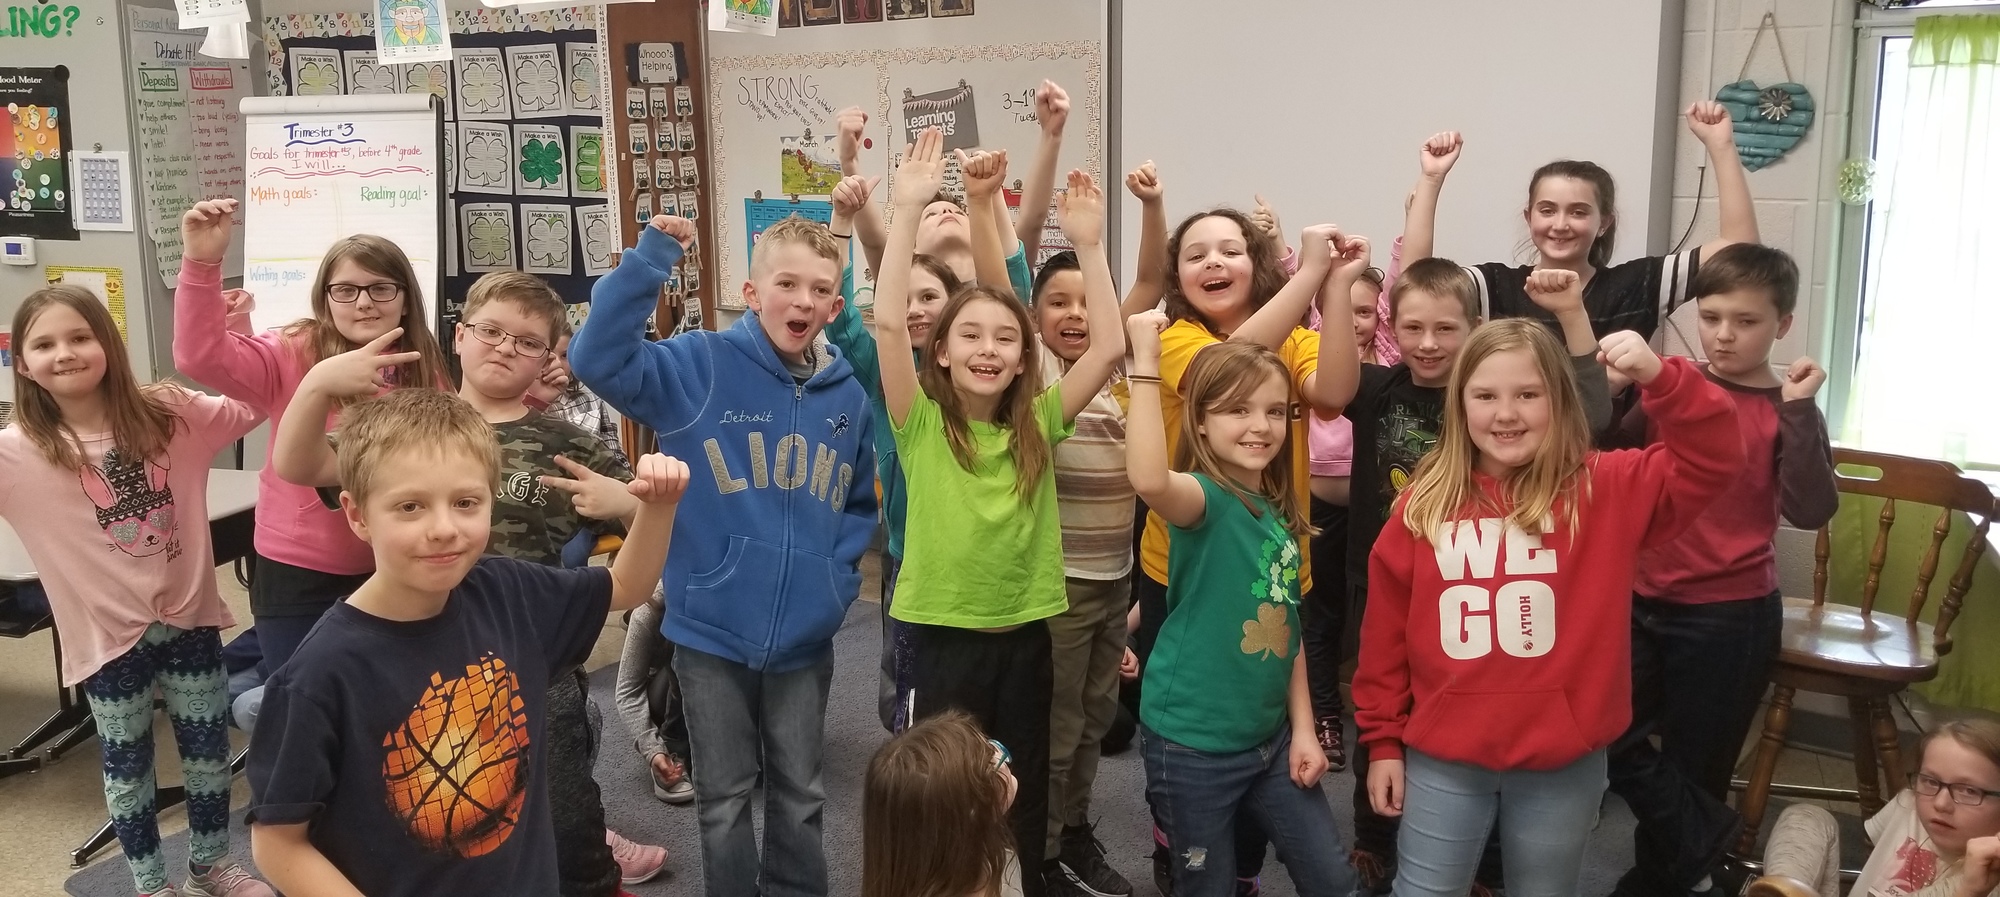 Third grade students at Davisburg standing and showing their I'm Strong faces.